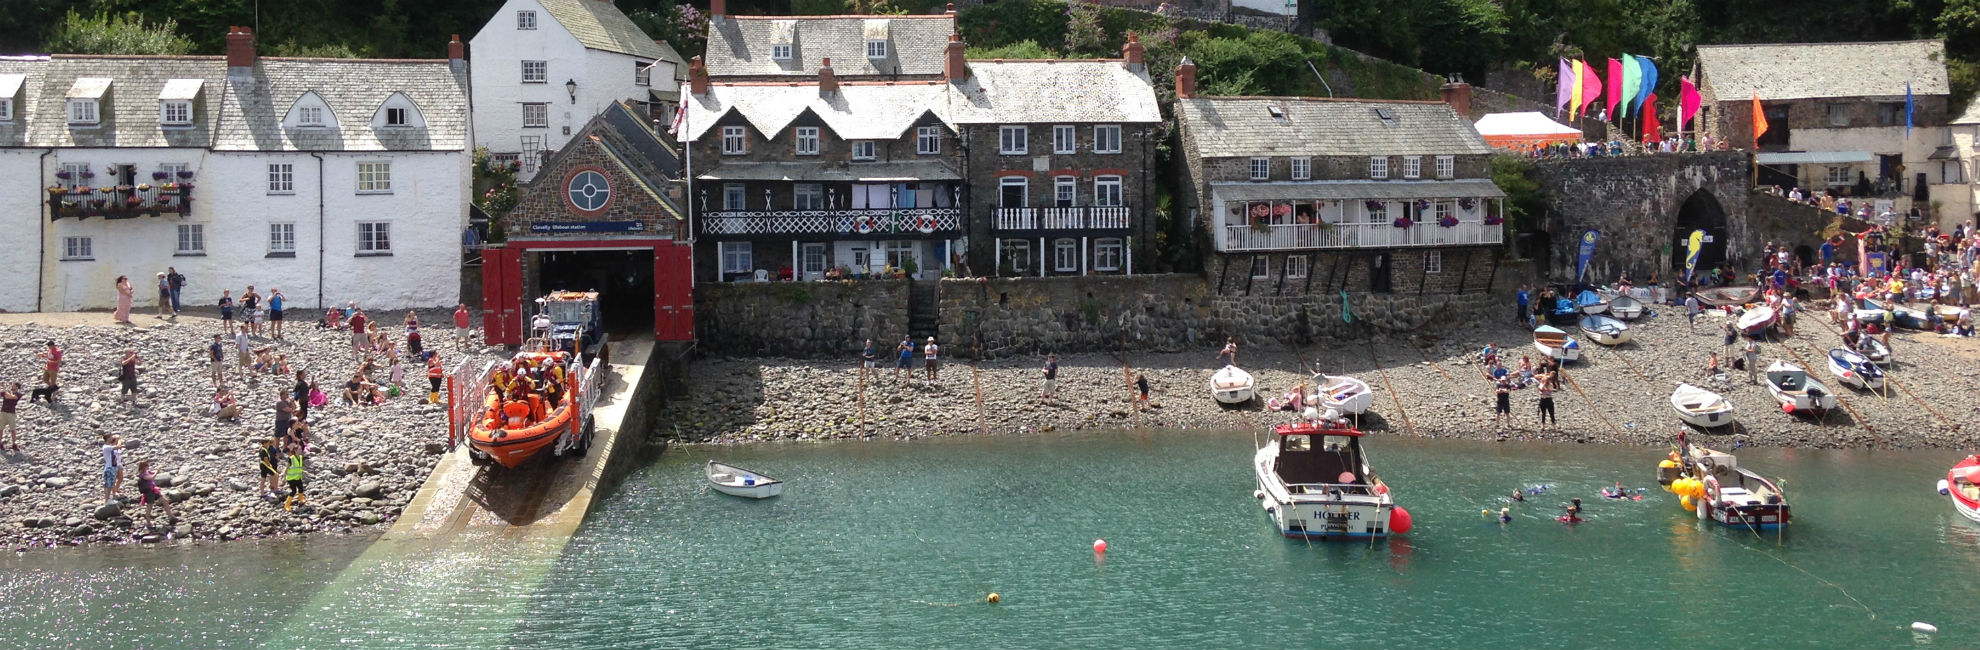 A busy summer day at Clovelly Harbour with tourists on the beach and boats launching from the slipway